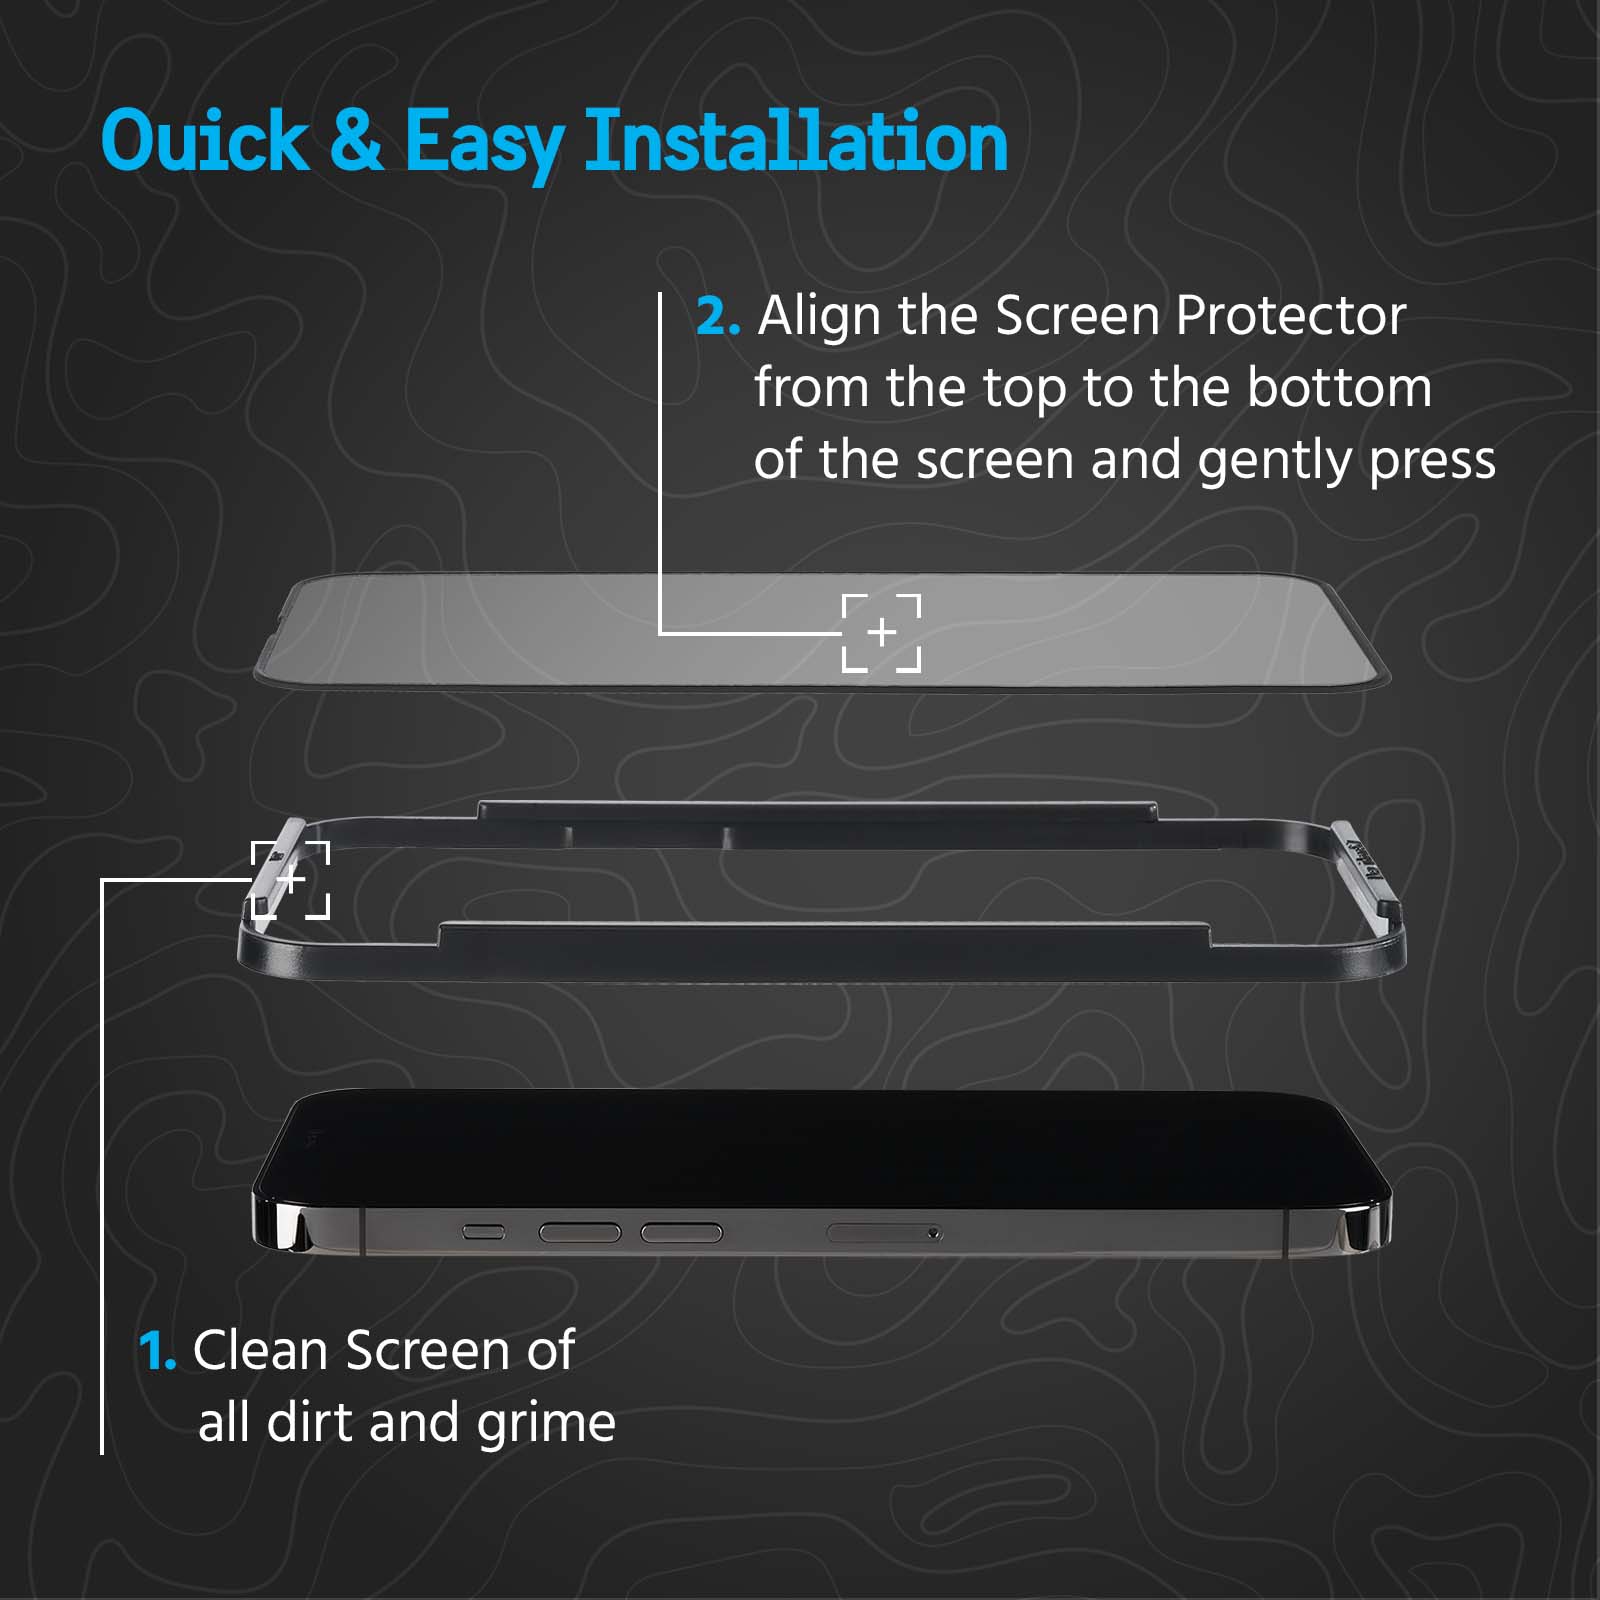 Quick & Easy Installation. 1. Clean screen of all dirt and grime. 2. Align the screen protector from the top to the bottom of the screen and gently press. color::clear